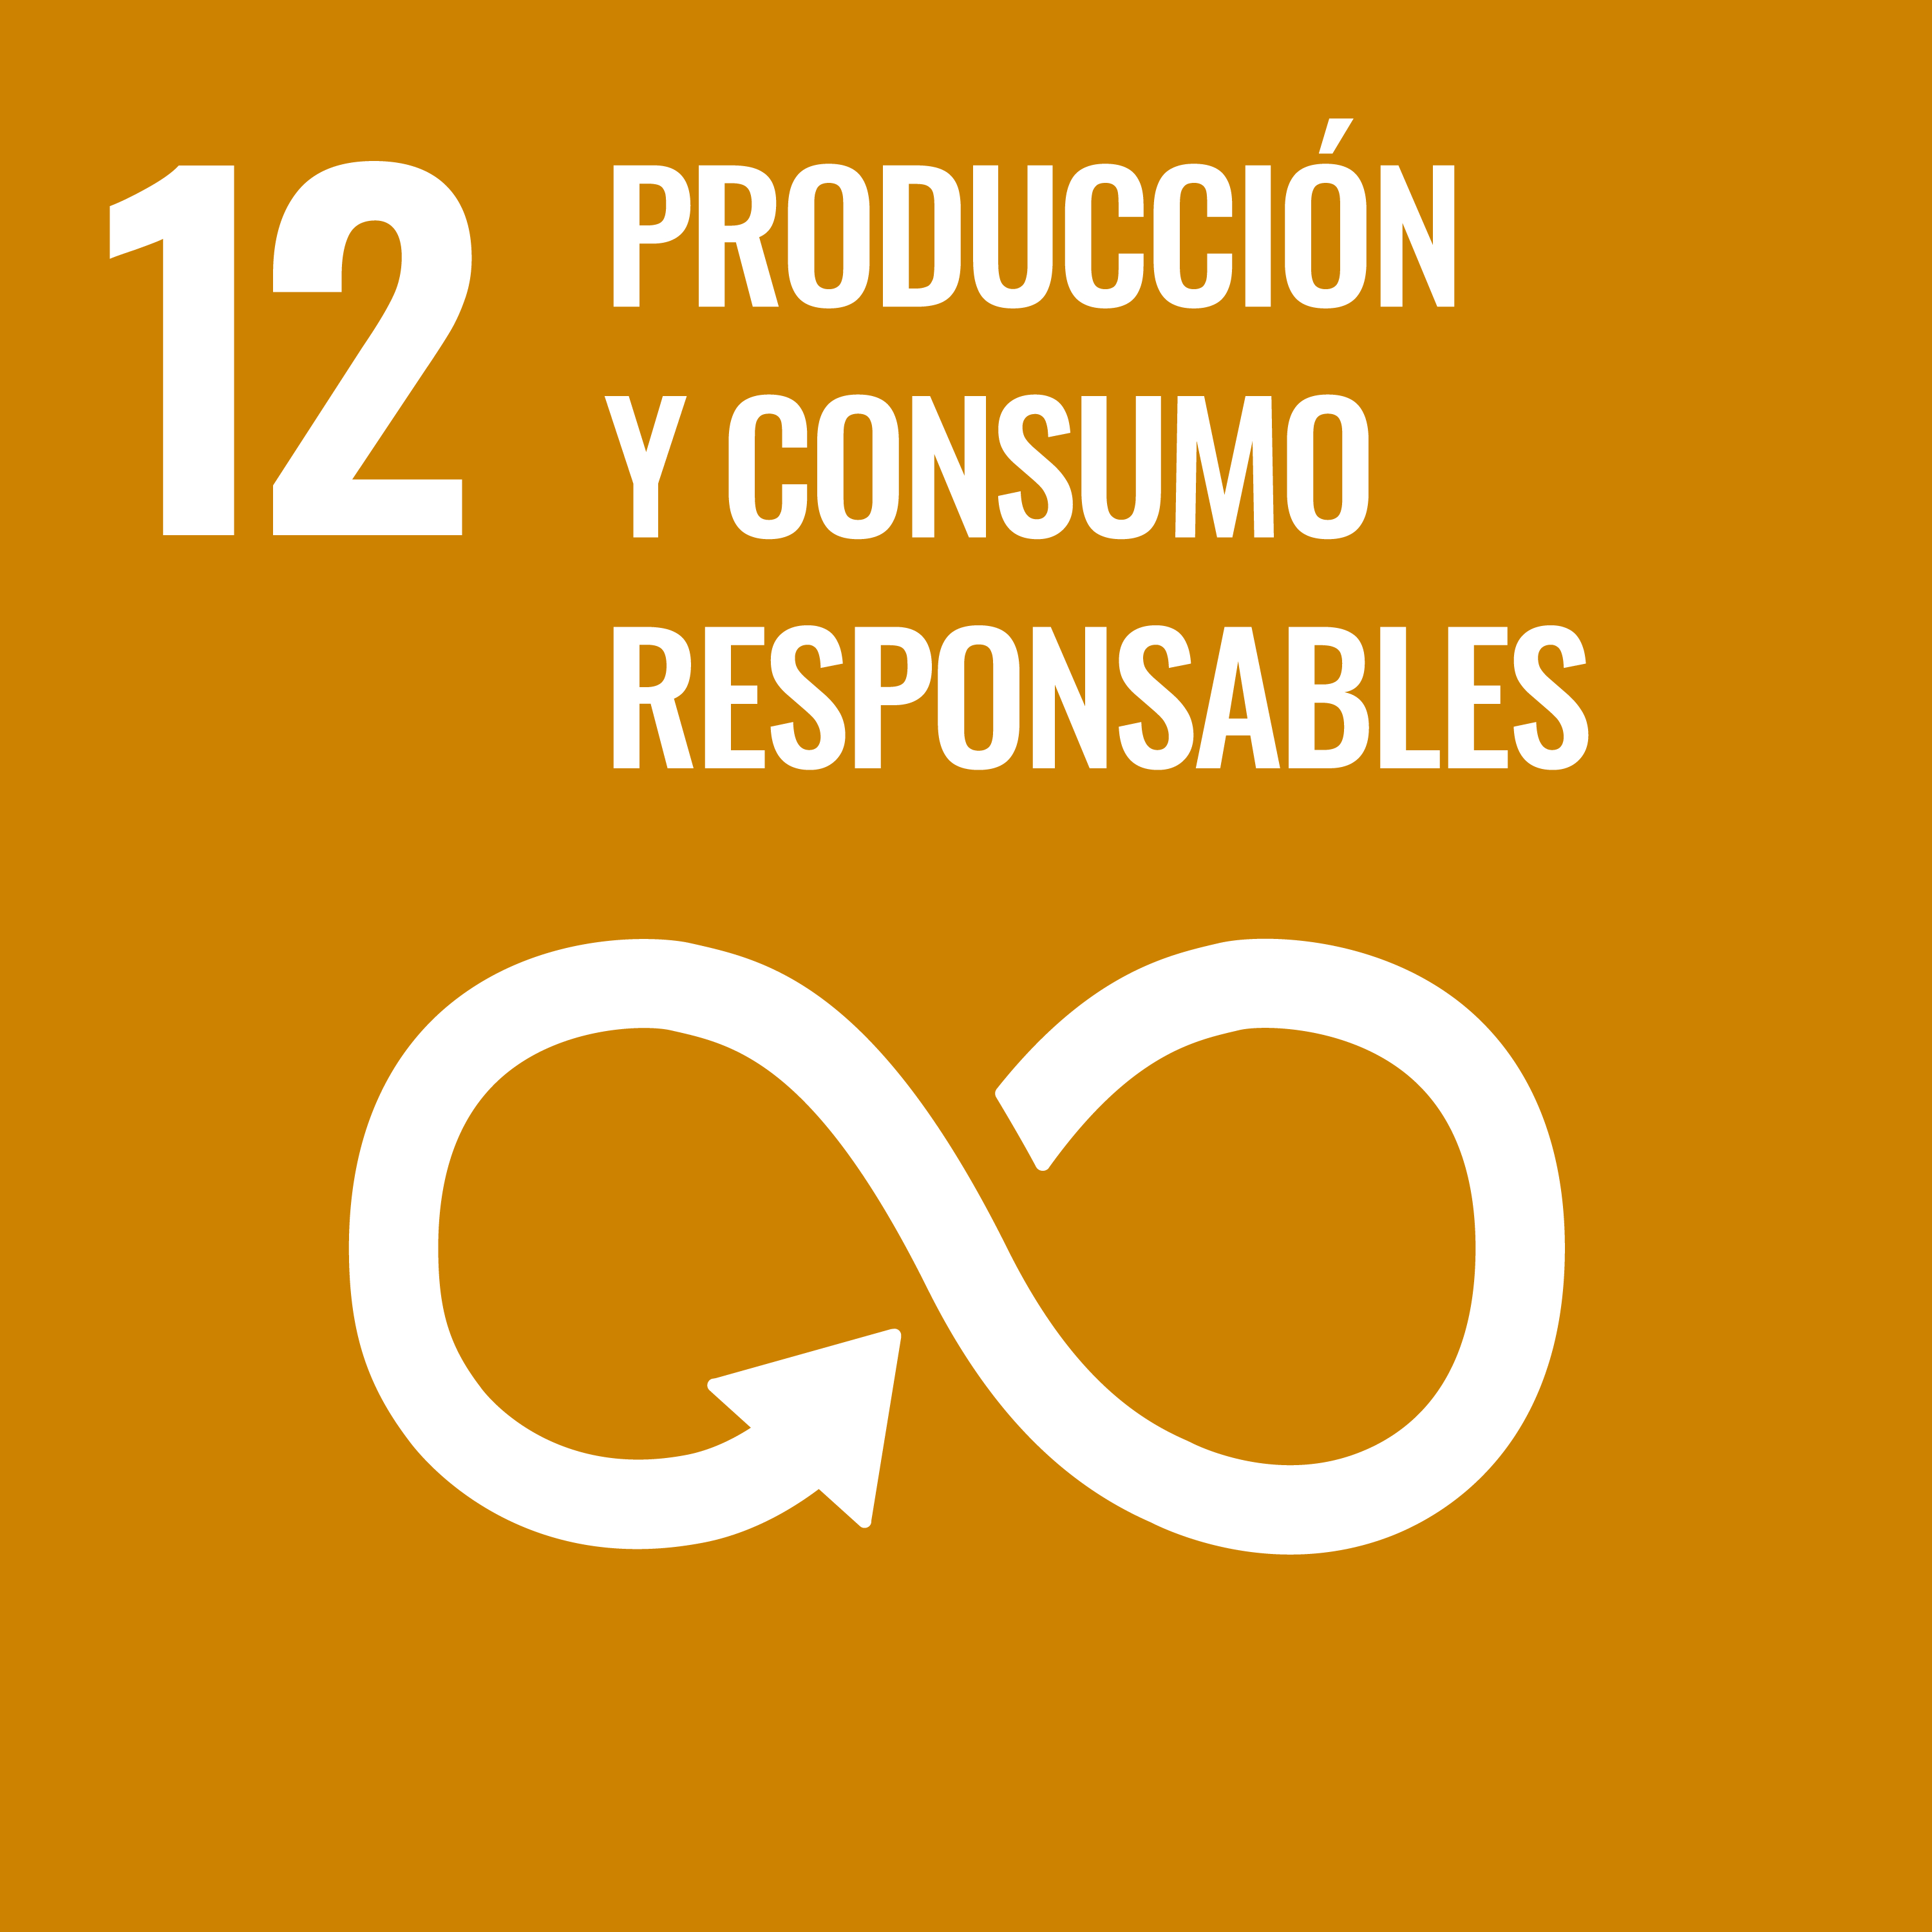 Responsible production and consumption